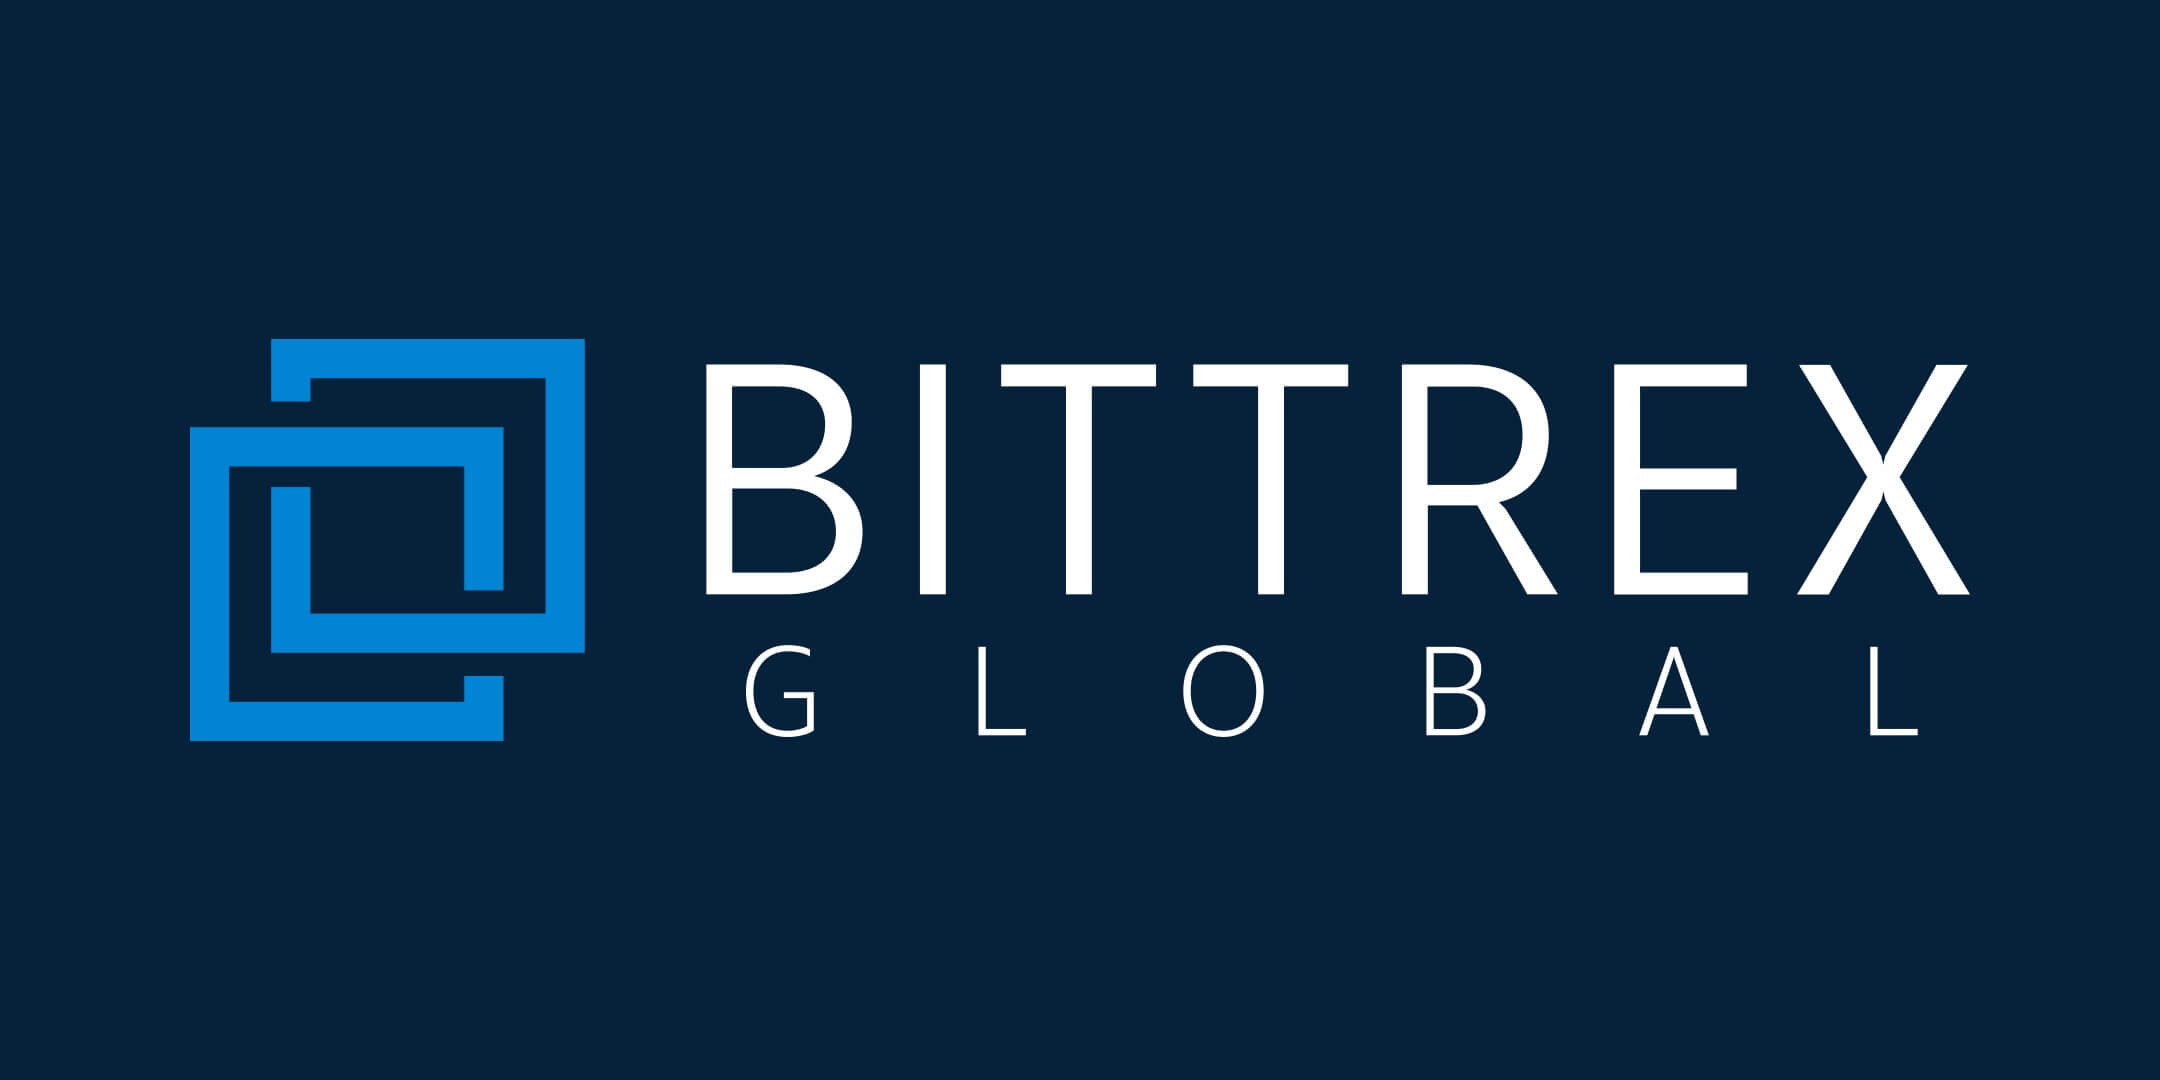 US SEC charges crypto exchange Bittrex with operating unregistered securities exchange